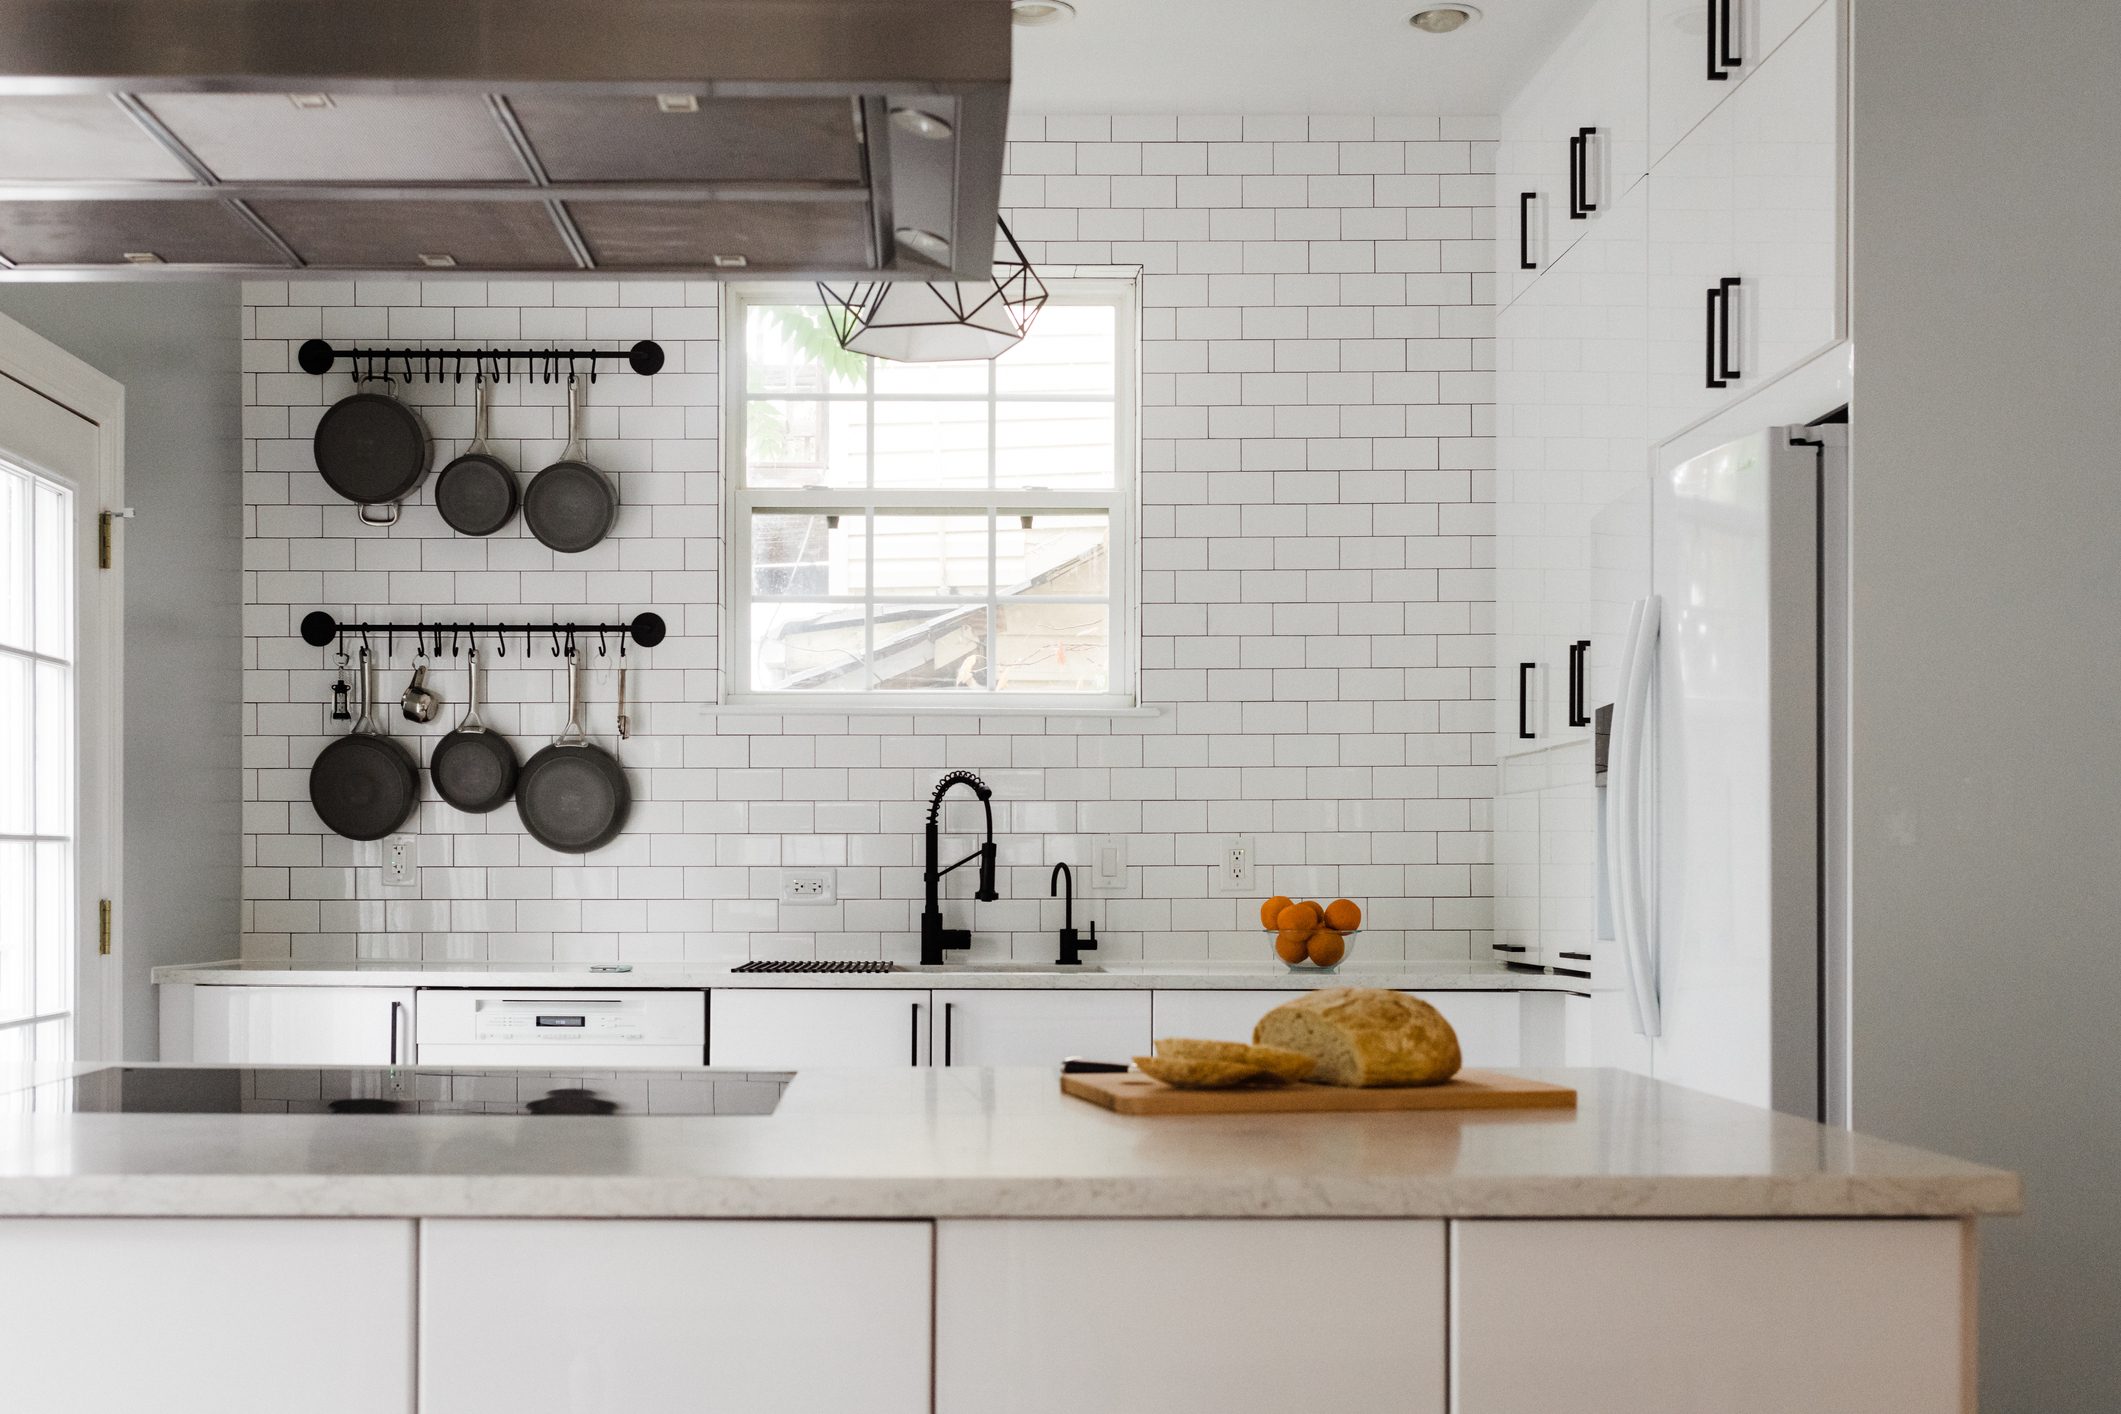 Insiders Tip: How To Organize The Kitchen Cabinets The Smart Way